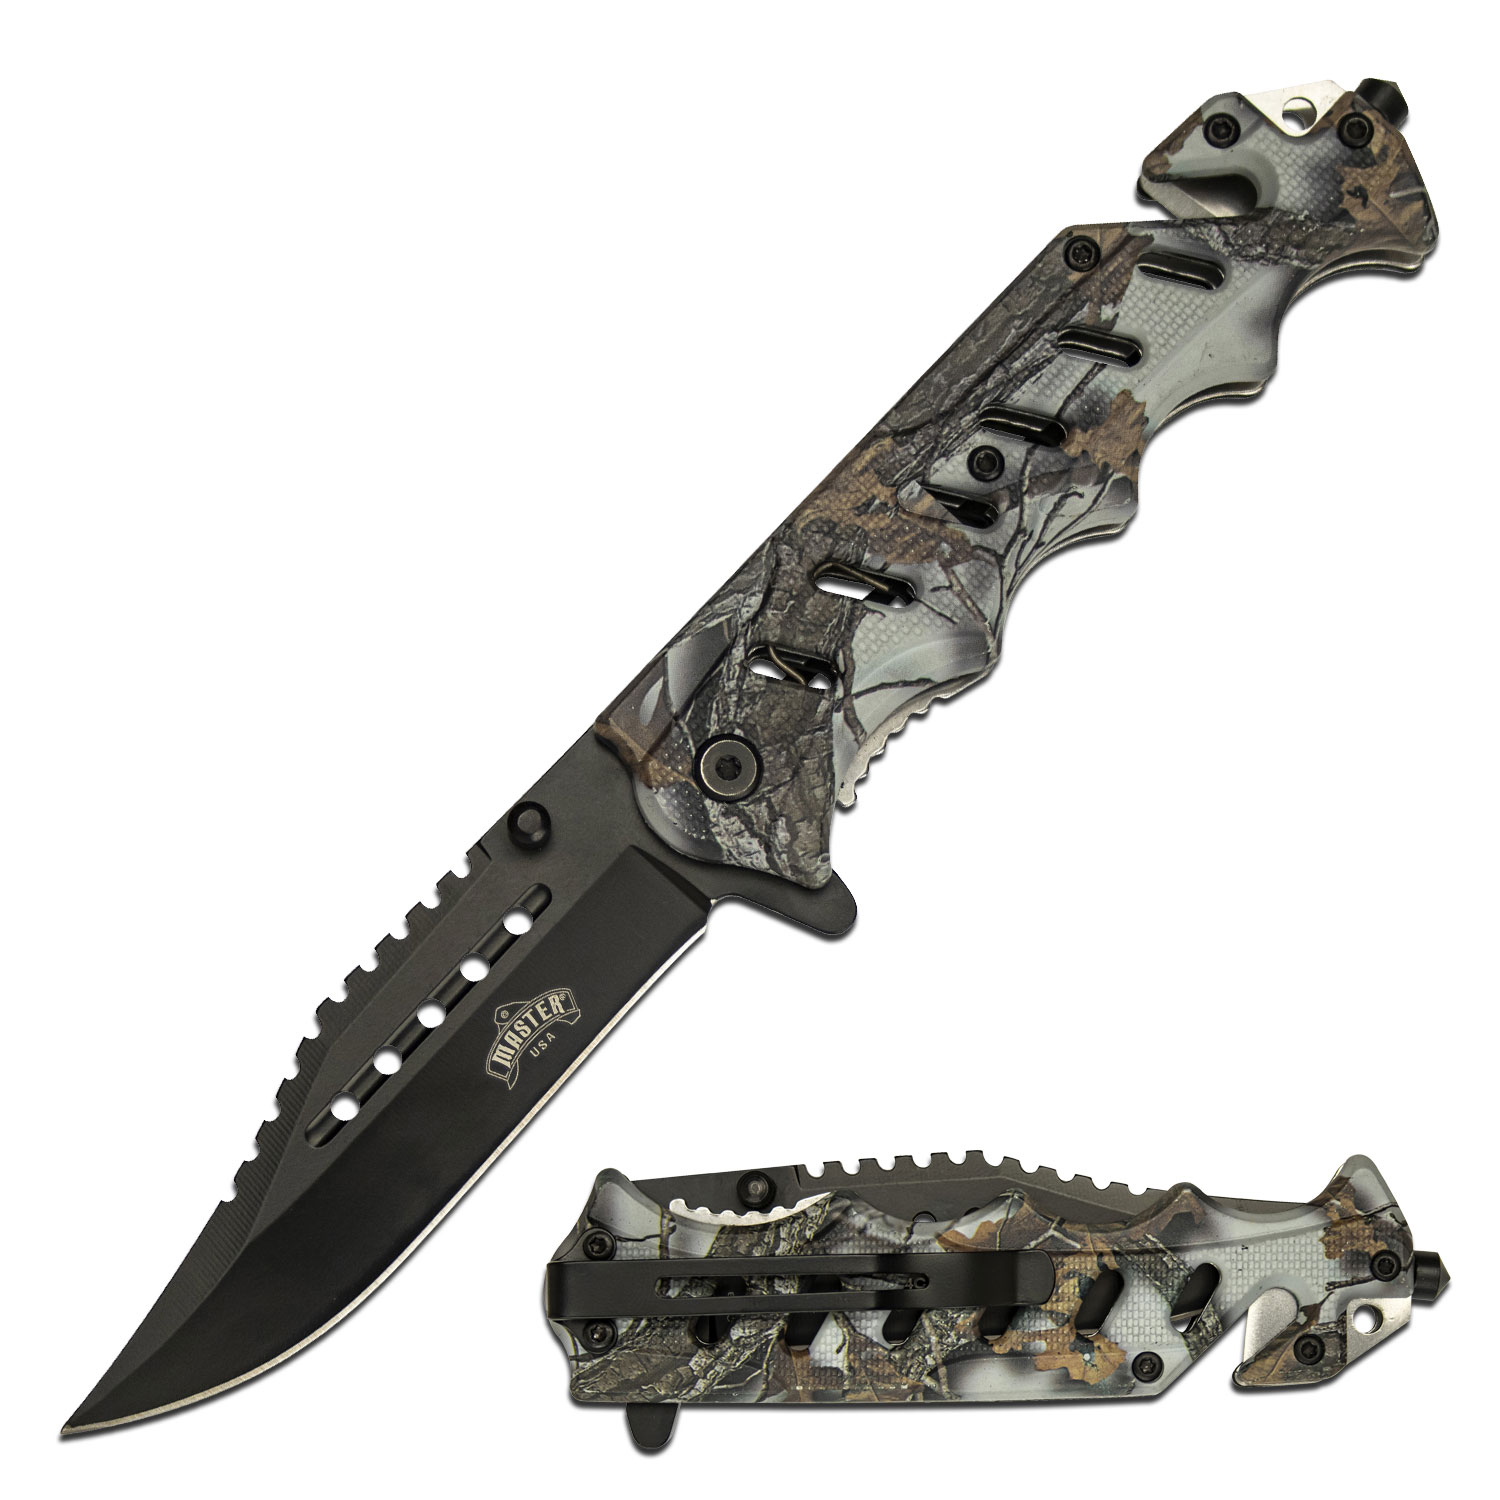 Spring-Assist Folding Knife Camo Tactical Rescue EDC 3.5In Stainless Blade